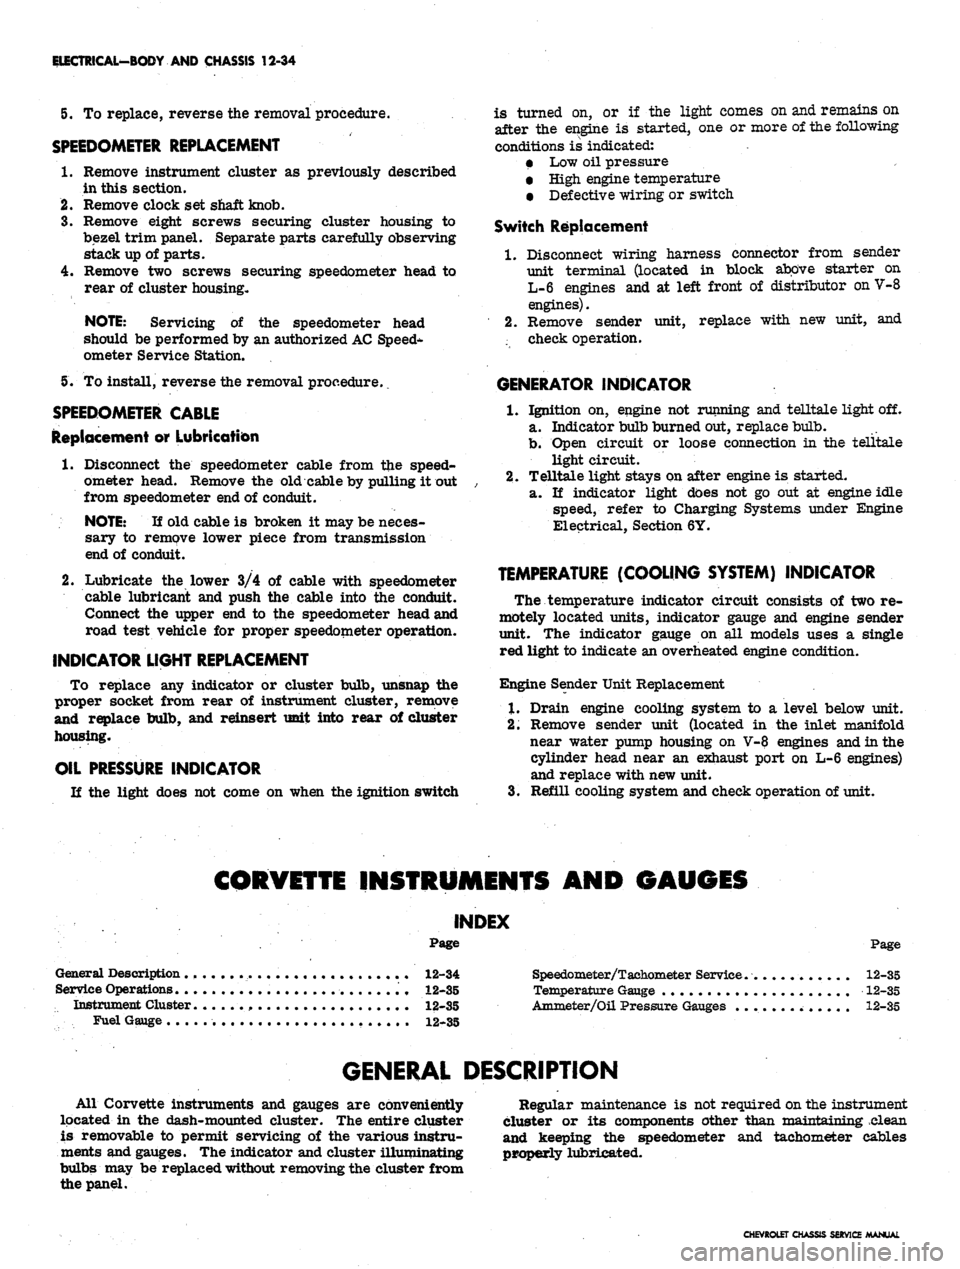 CHEVROLET CAMARO 1967 1.G Chassis Workshop Manual 
ELECTRICAL-BODY AND CHASSIS 12-34

5. To replace, reverse the removal procedure.

SPEEDOMETER REPLACEMENT

1.
 Remove instrument cluster as previously described

in this section.

2.
 Remove clock se